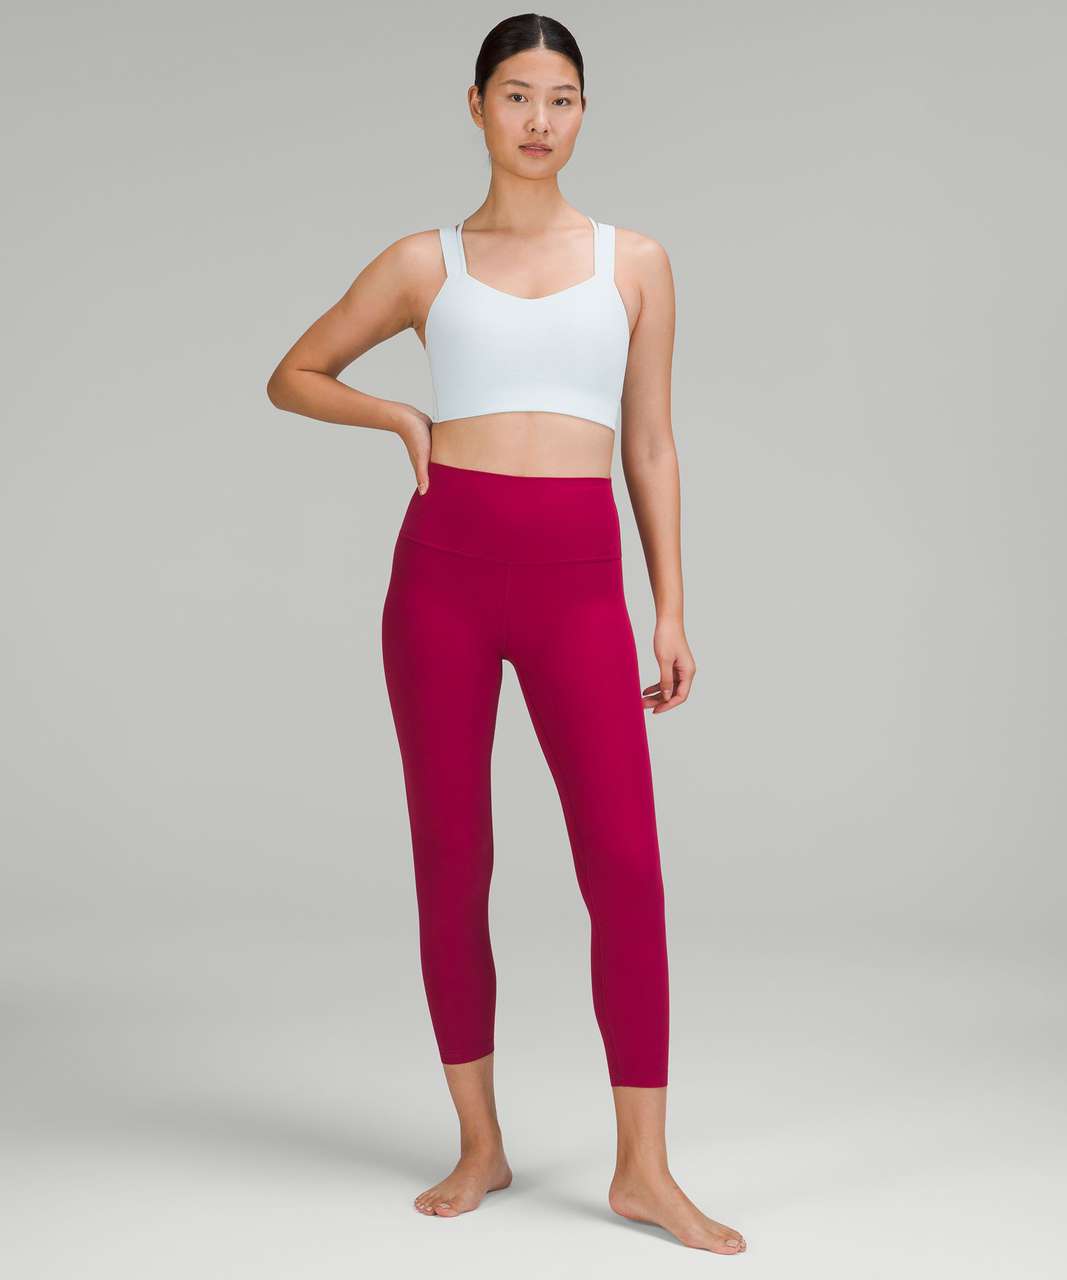 What is Align HR at Lululemon? - Playbite